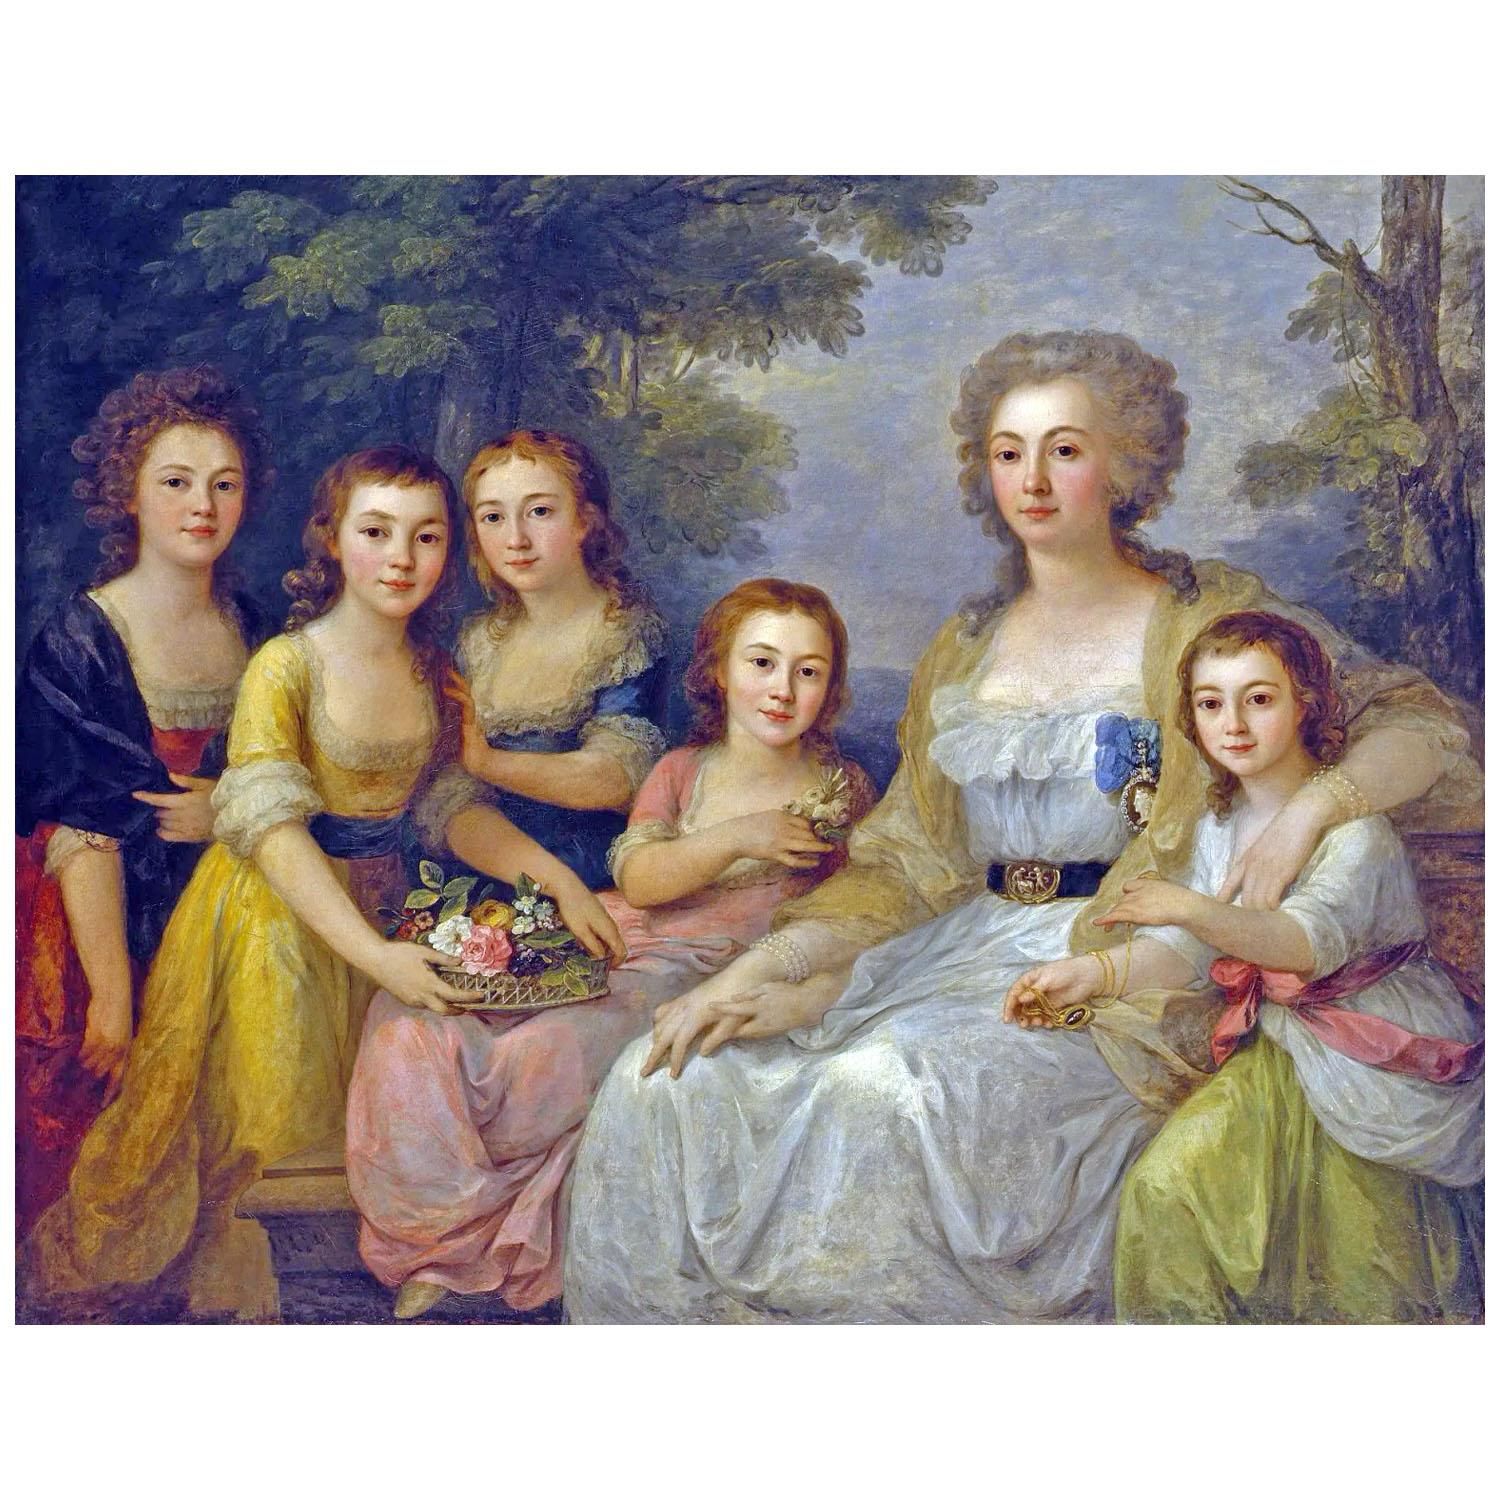 Angelica Kauffmann. Countess A. Protasova with her Daughters. 1788. Hermitage